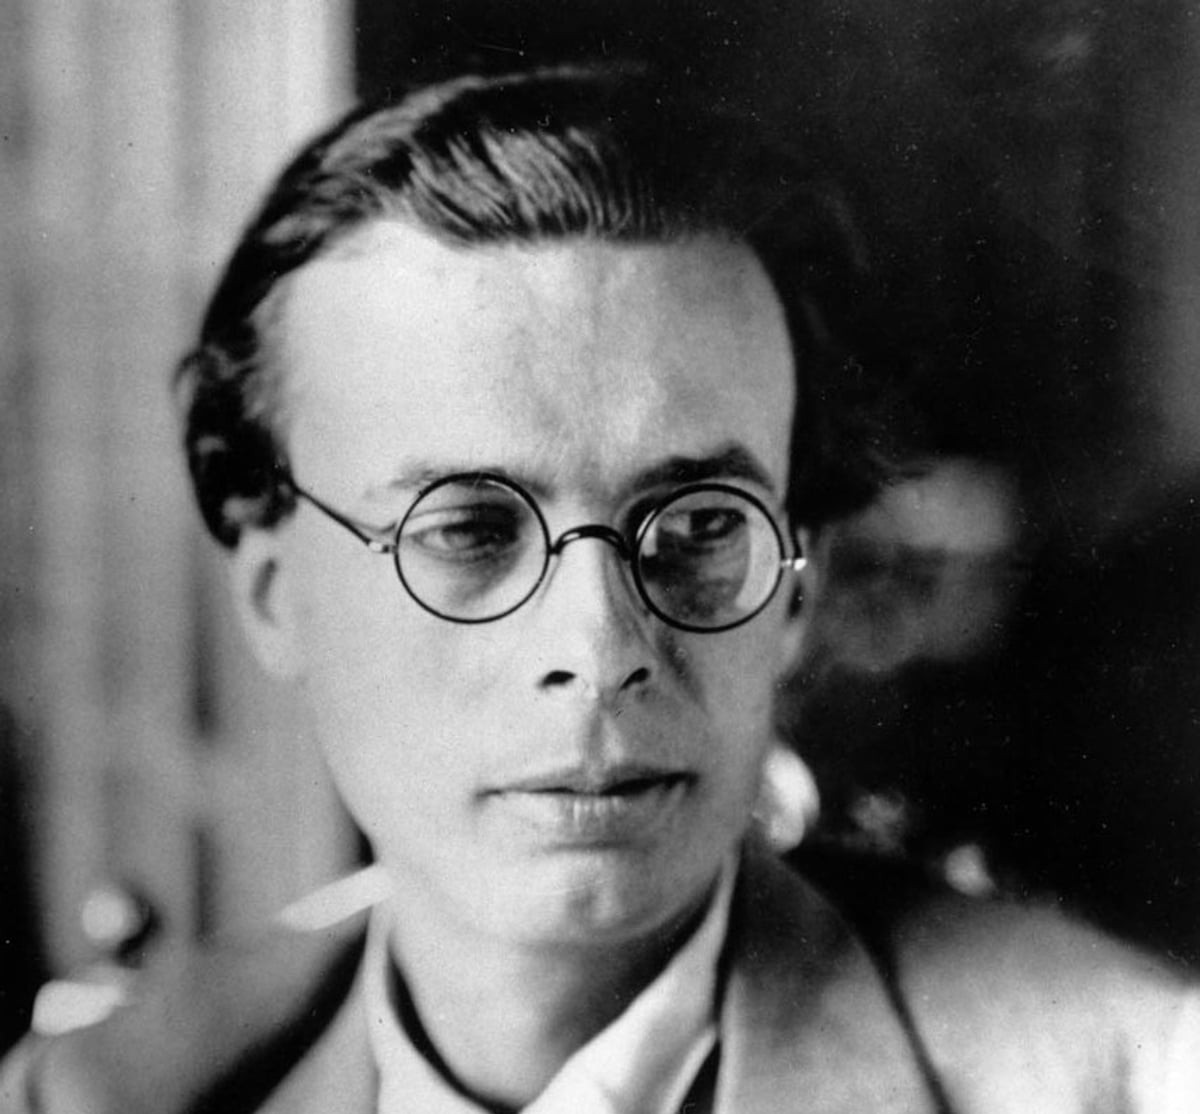 What happened to Aldous Huxley